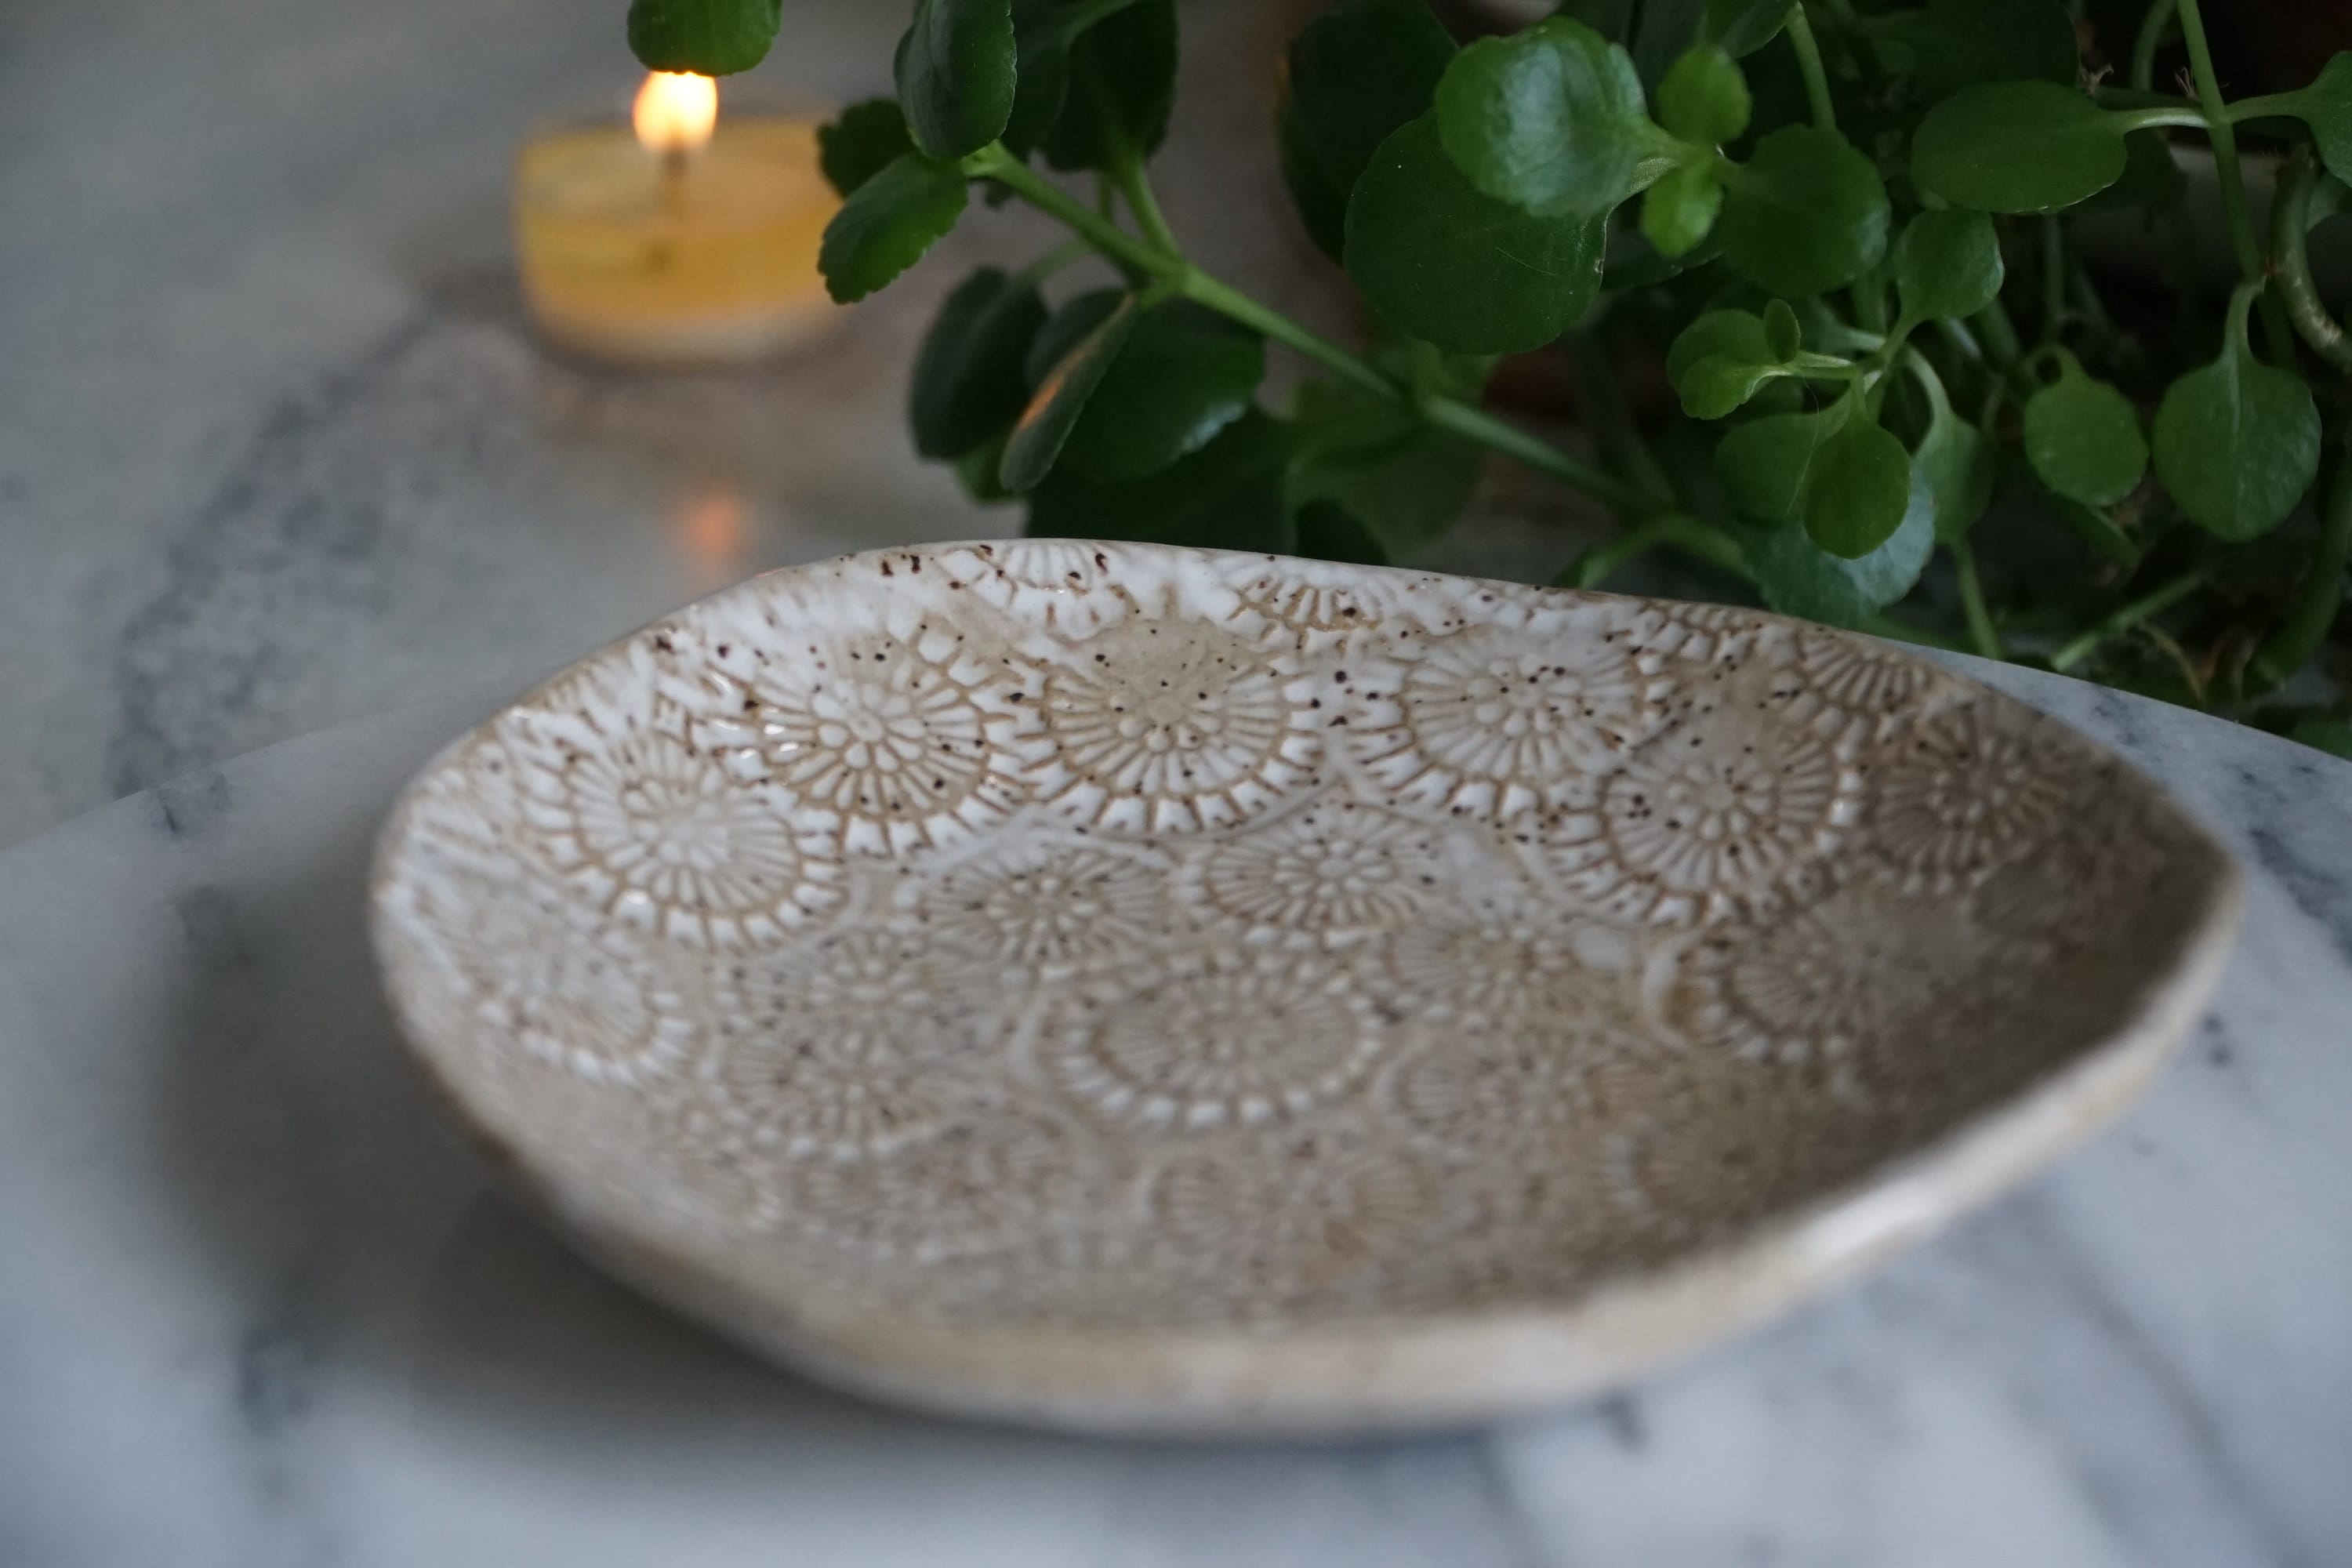 Speckled Stoneware Flora Bowl - White Stamped Dish - Small Serving Bowl - Catch-All Dish - Jewelry Dish - Wabi Sabi - Rustic Plate